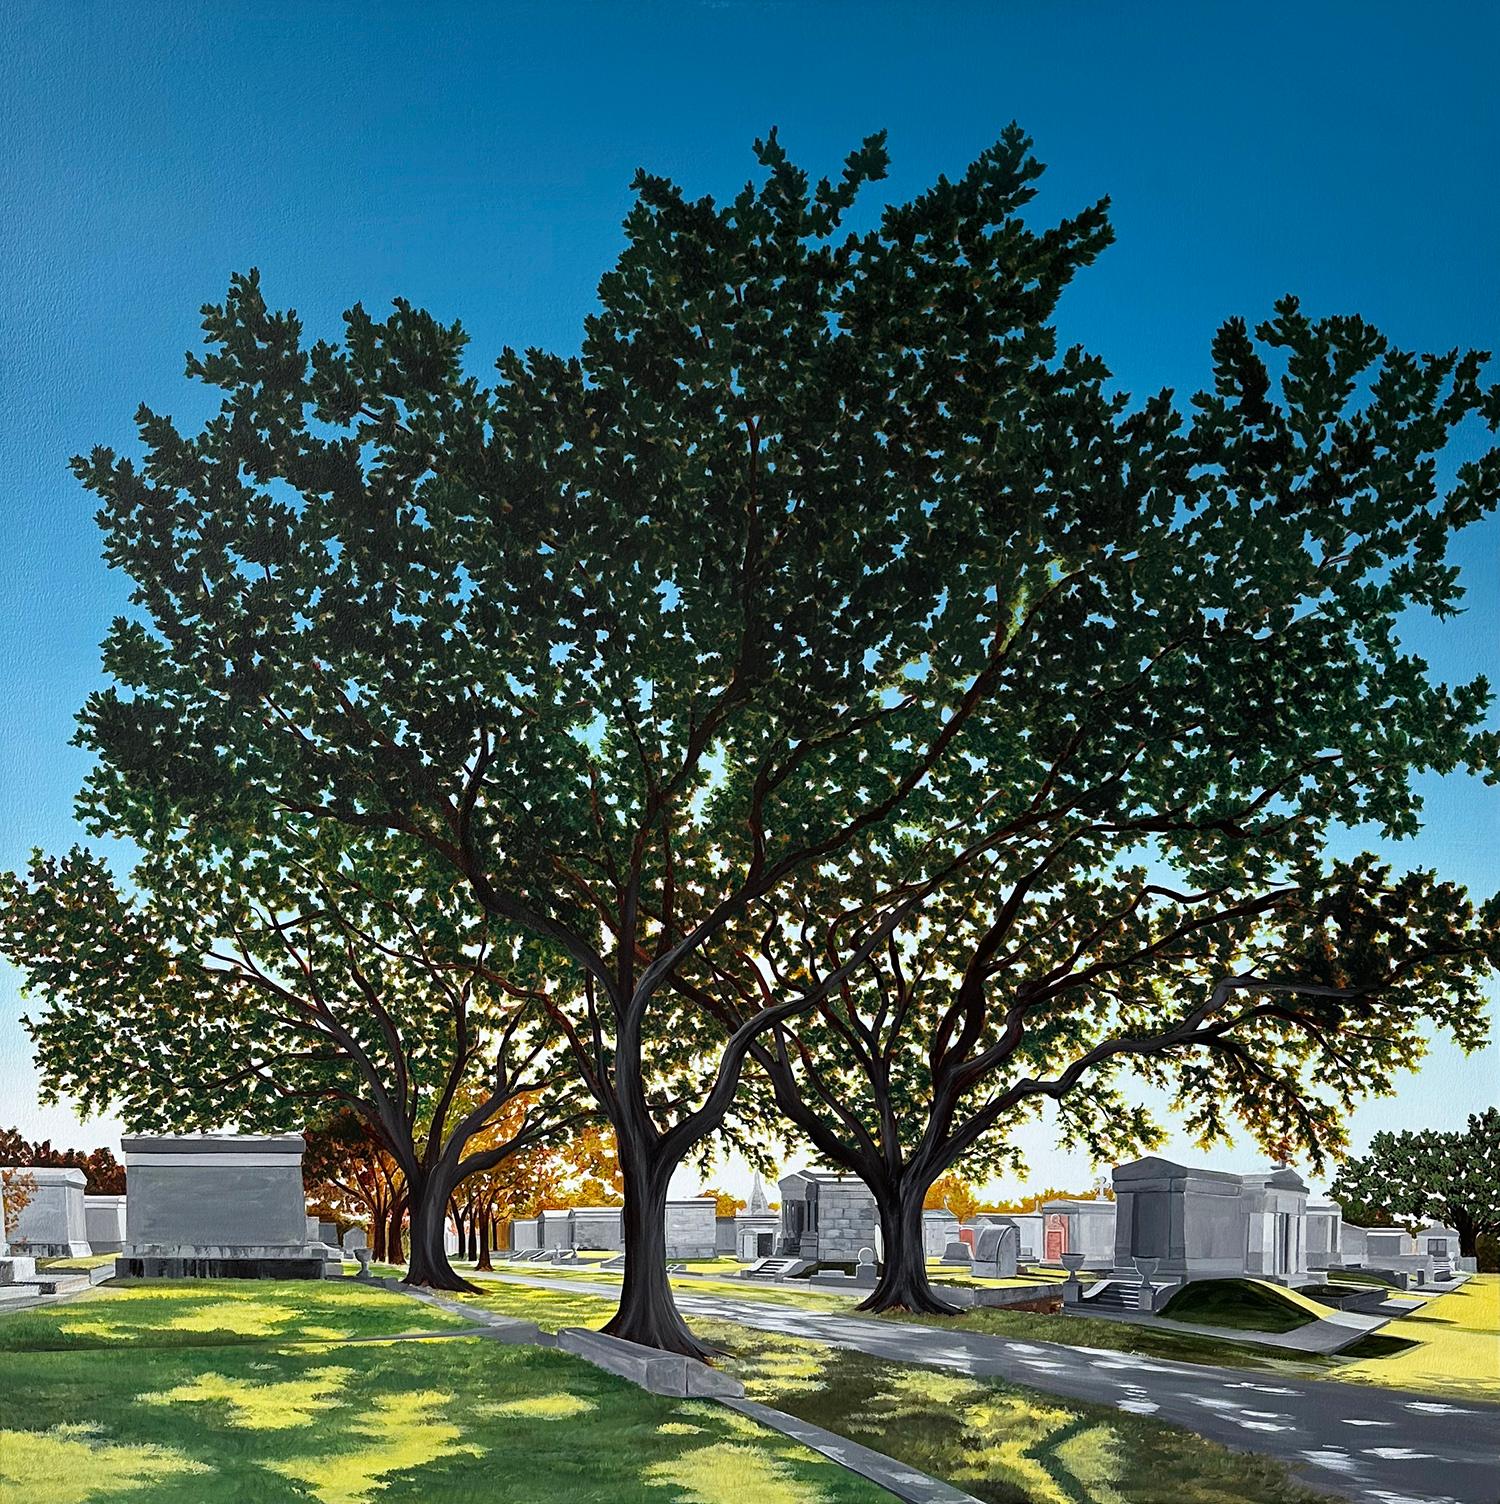 "Live Oak at Metairie Cemetery", by Kristin Moore, is a part of her 2024 solo exhibition, “Through the Bayou, Into the Garden”, at Ferrara Showman Gallery. Marking a transition from her previous work, "Live Oak at Metairie Cemetery" shows Kristin